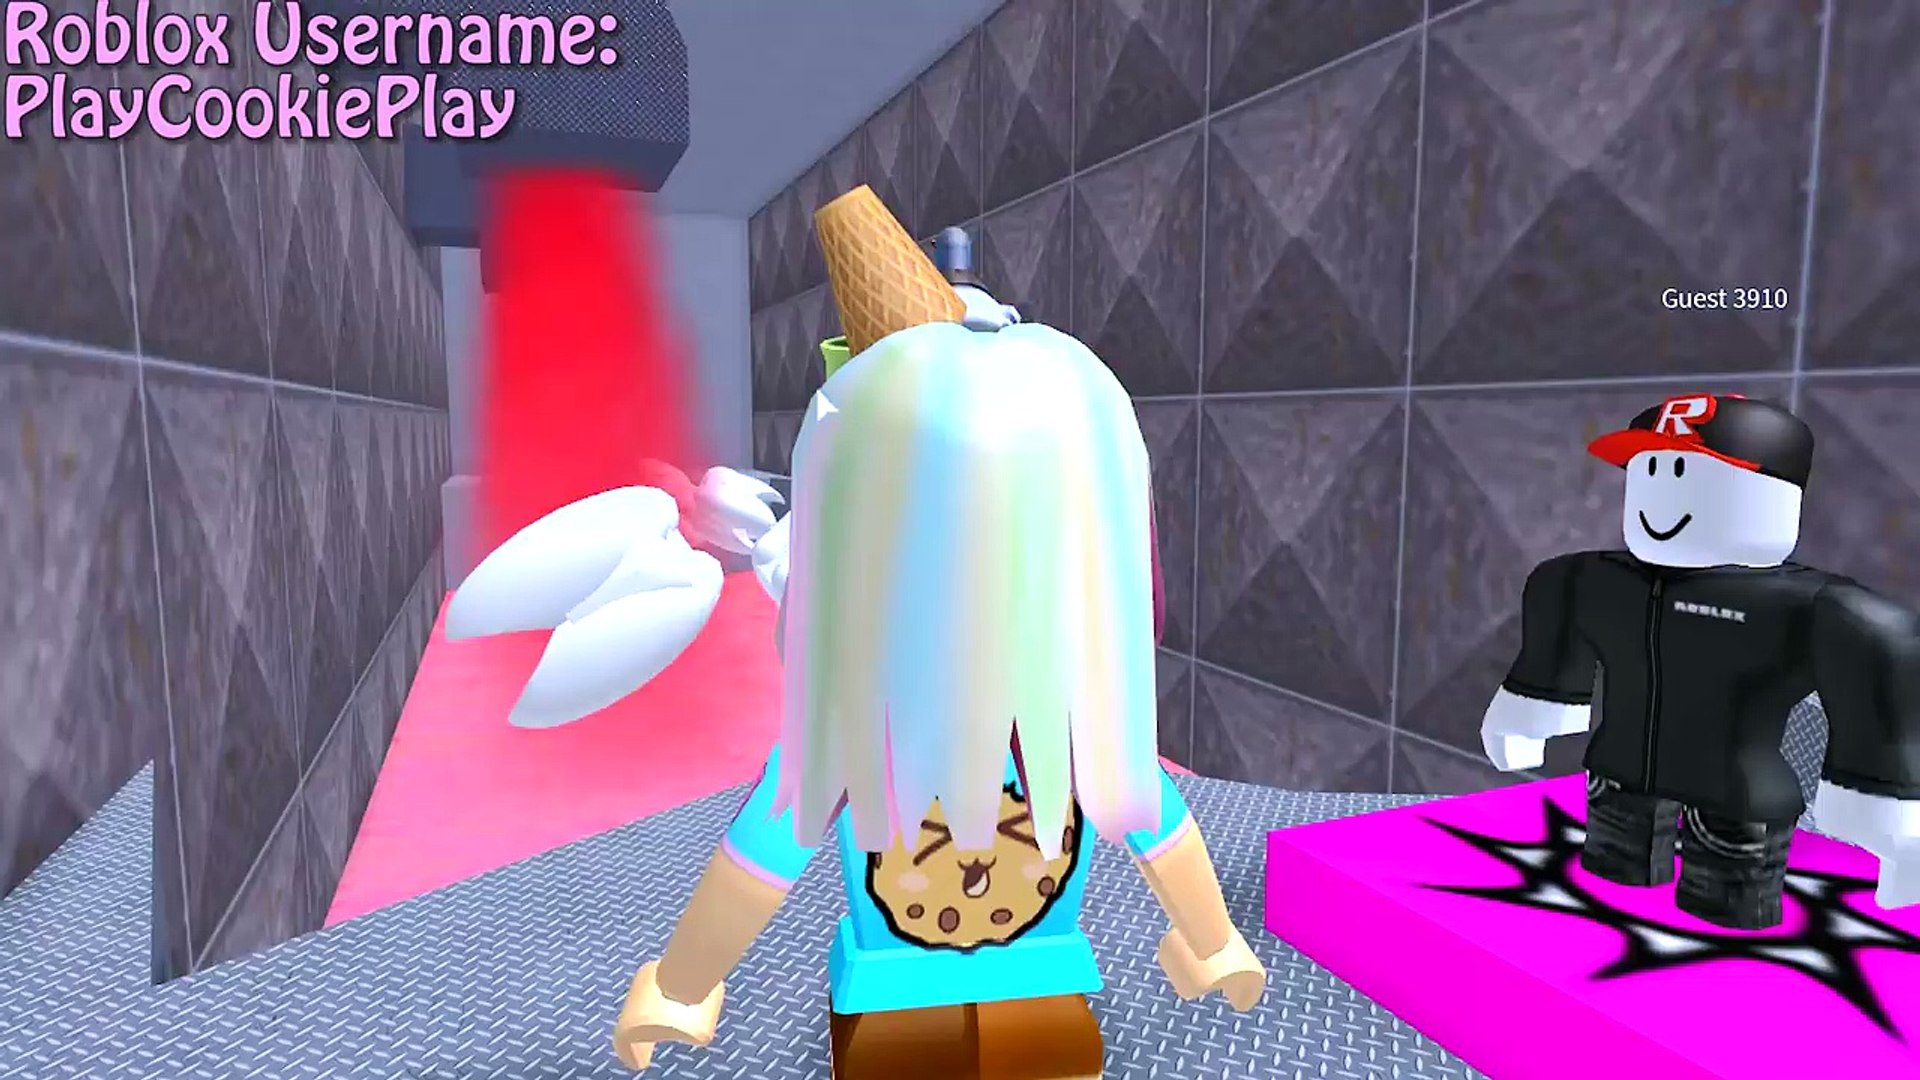 Dental Office Visit Jumping On Teeth Roblox Video Game Play Escape The Dentist Obby Vmsmrx2h5nw Video Dailymotion - roblox video game play escape the dentist obby